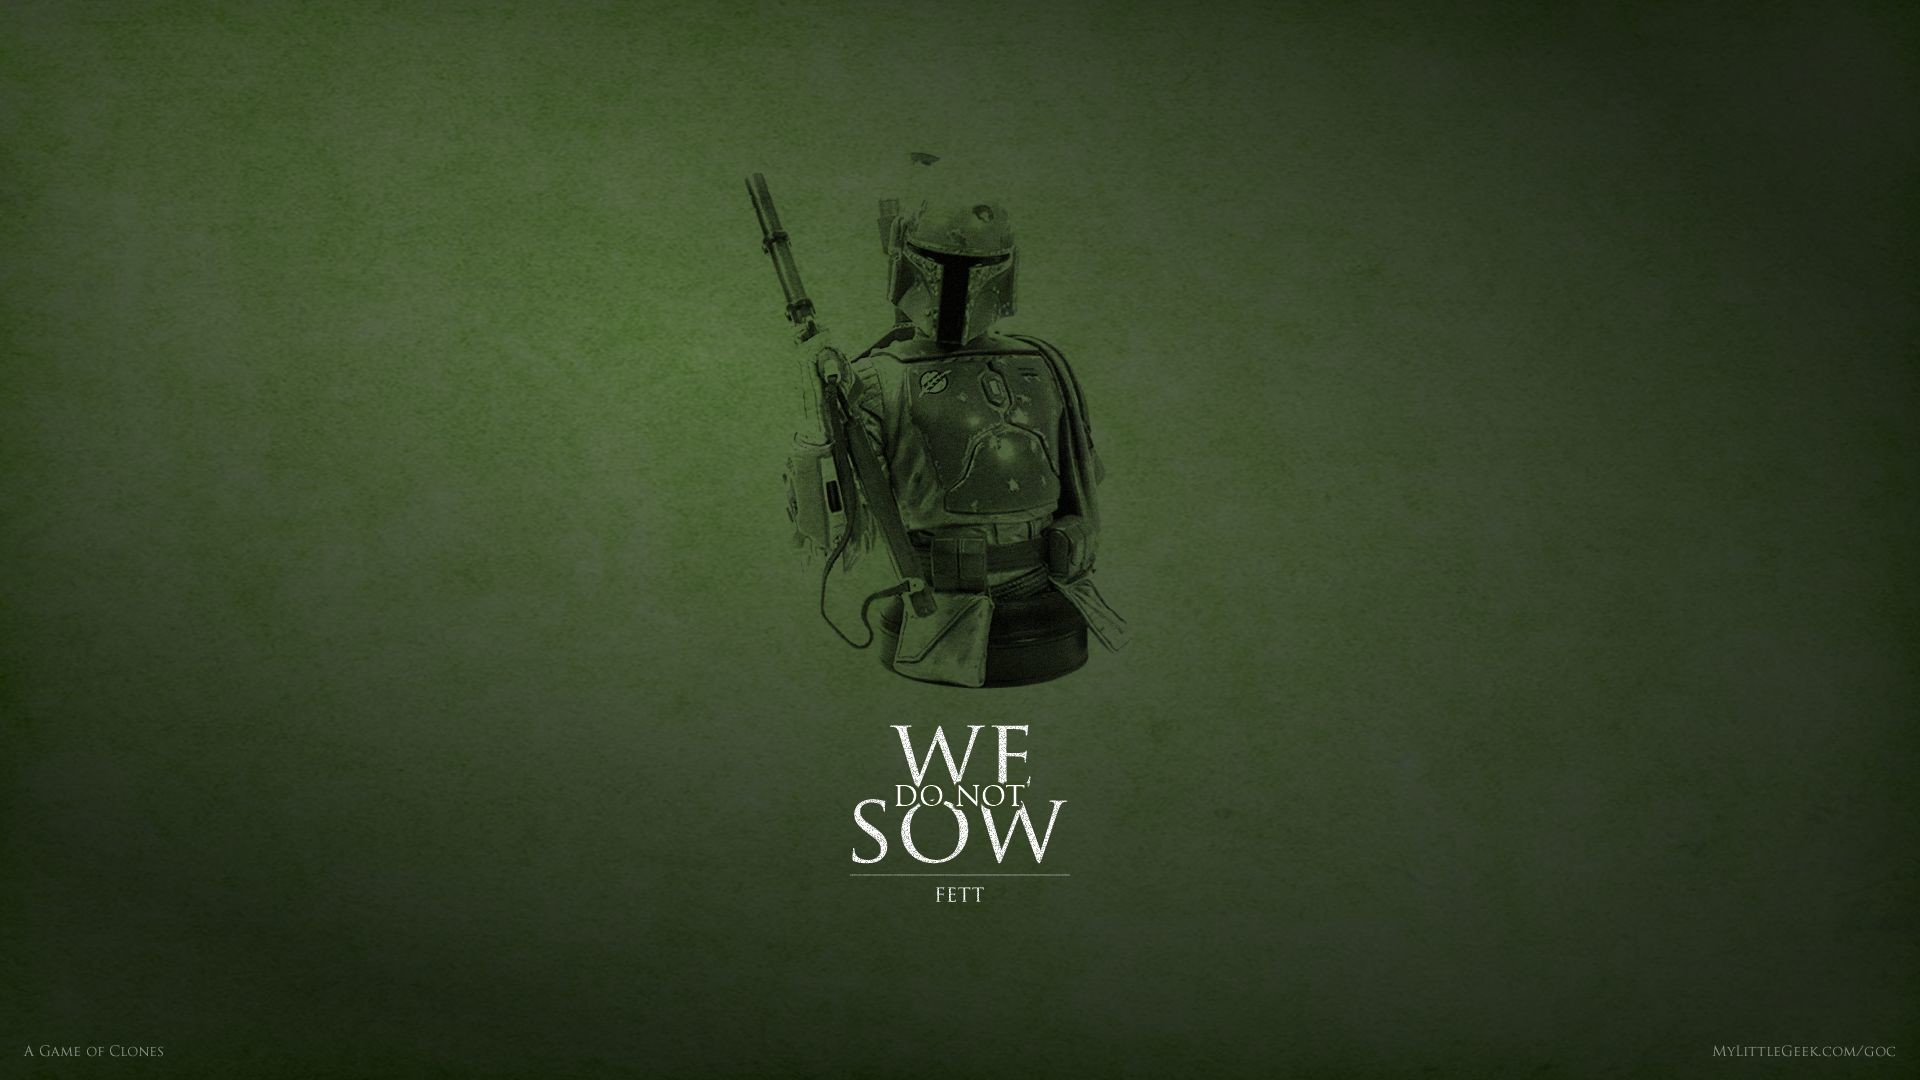 Game of Clones Star Wars / Game of Thrones Mashup Wallpapers